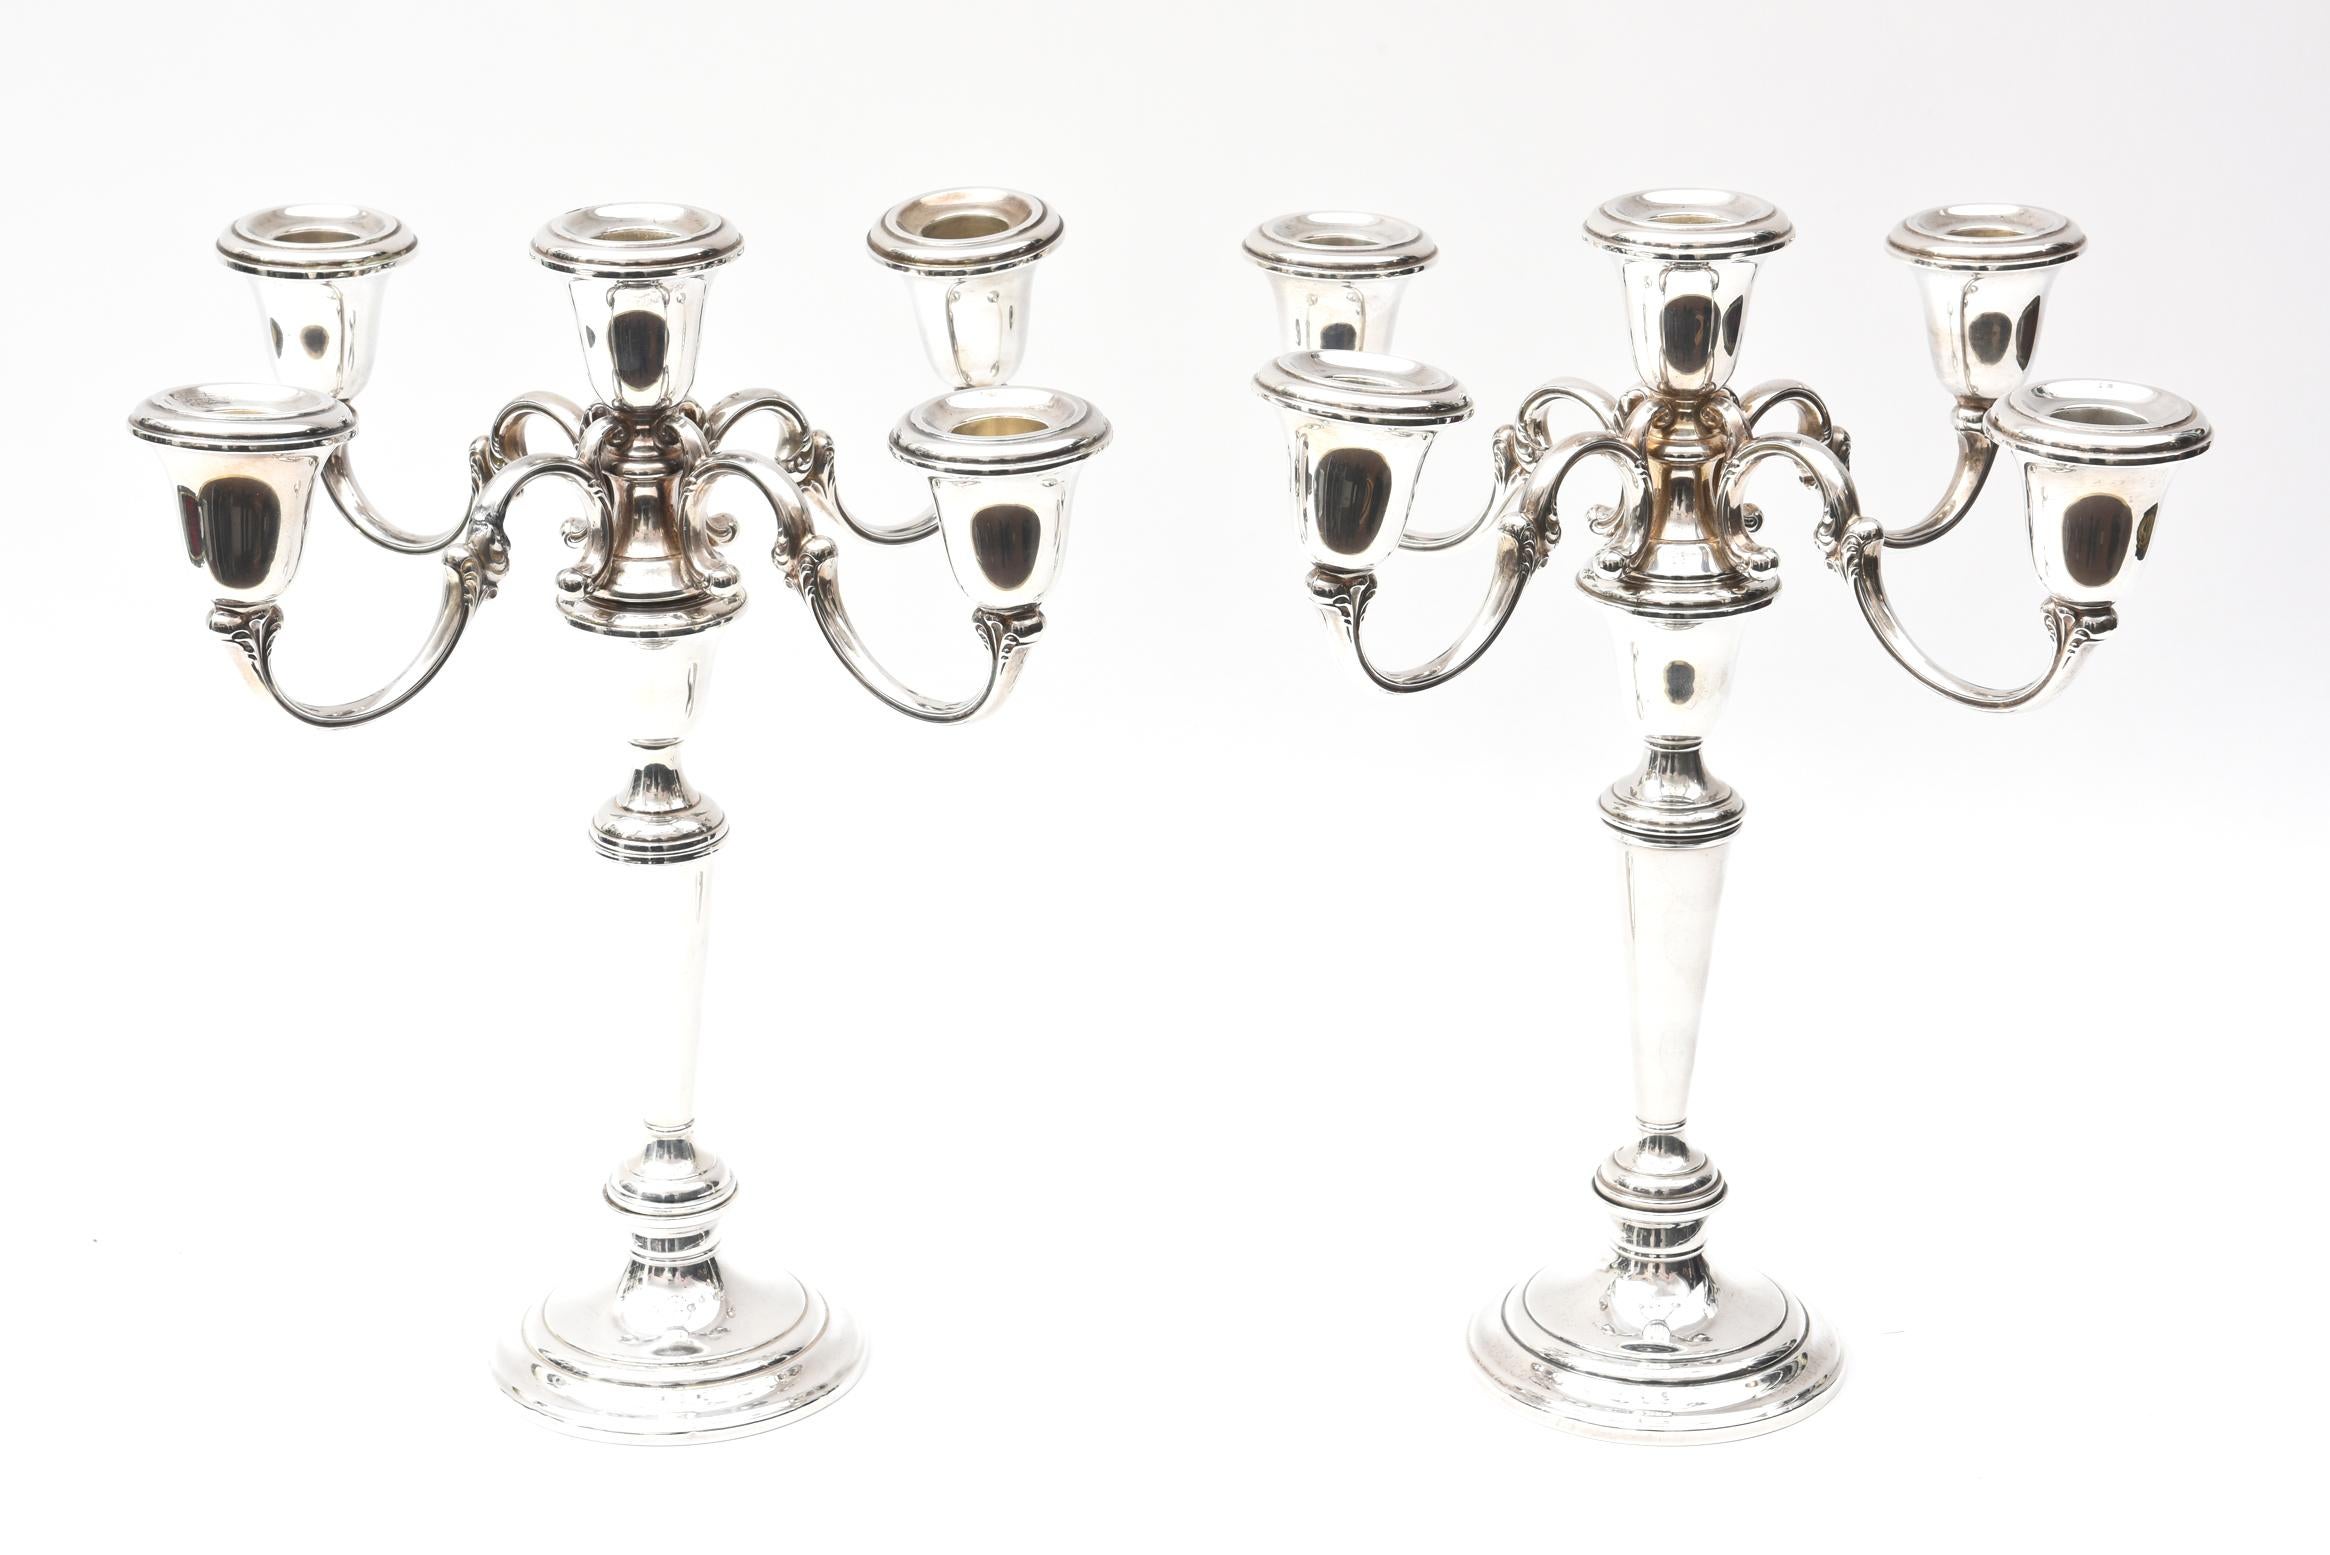 A classic and impressive 4-arm sterling candelabra from one of America's finest silversmith. This pair features crisp metal work and is a nice size with or without candles. Please note its convertible feature to change to single candlesticks. In